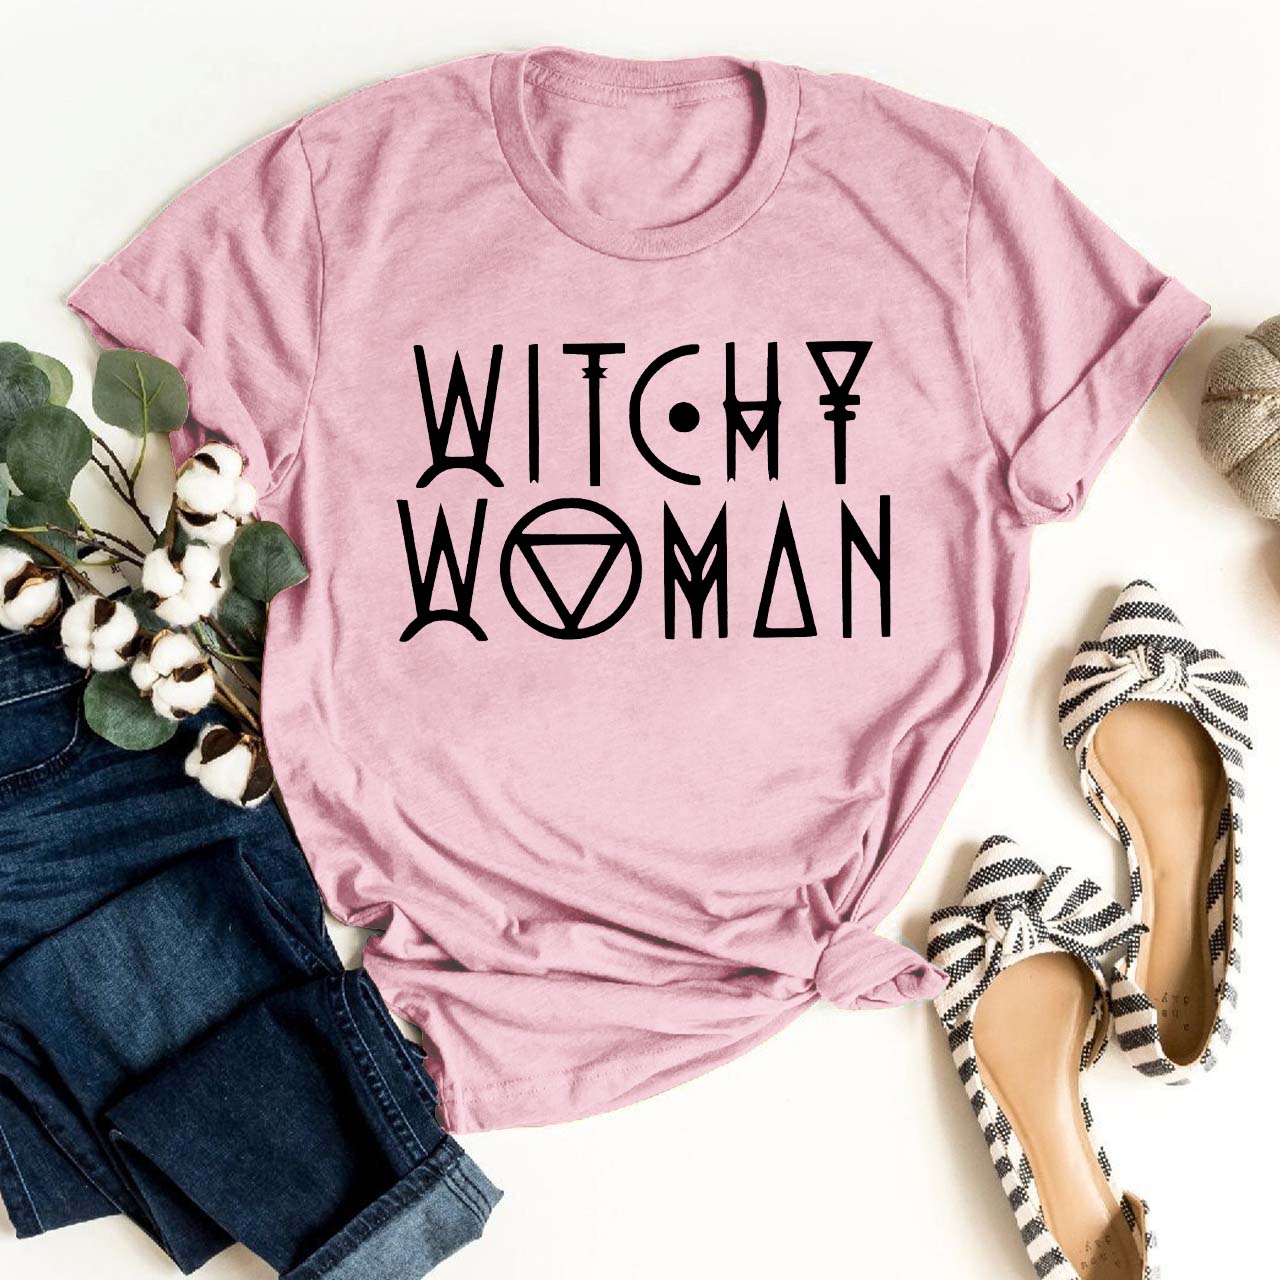 Mystical Witchy Woman Shirt For Her